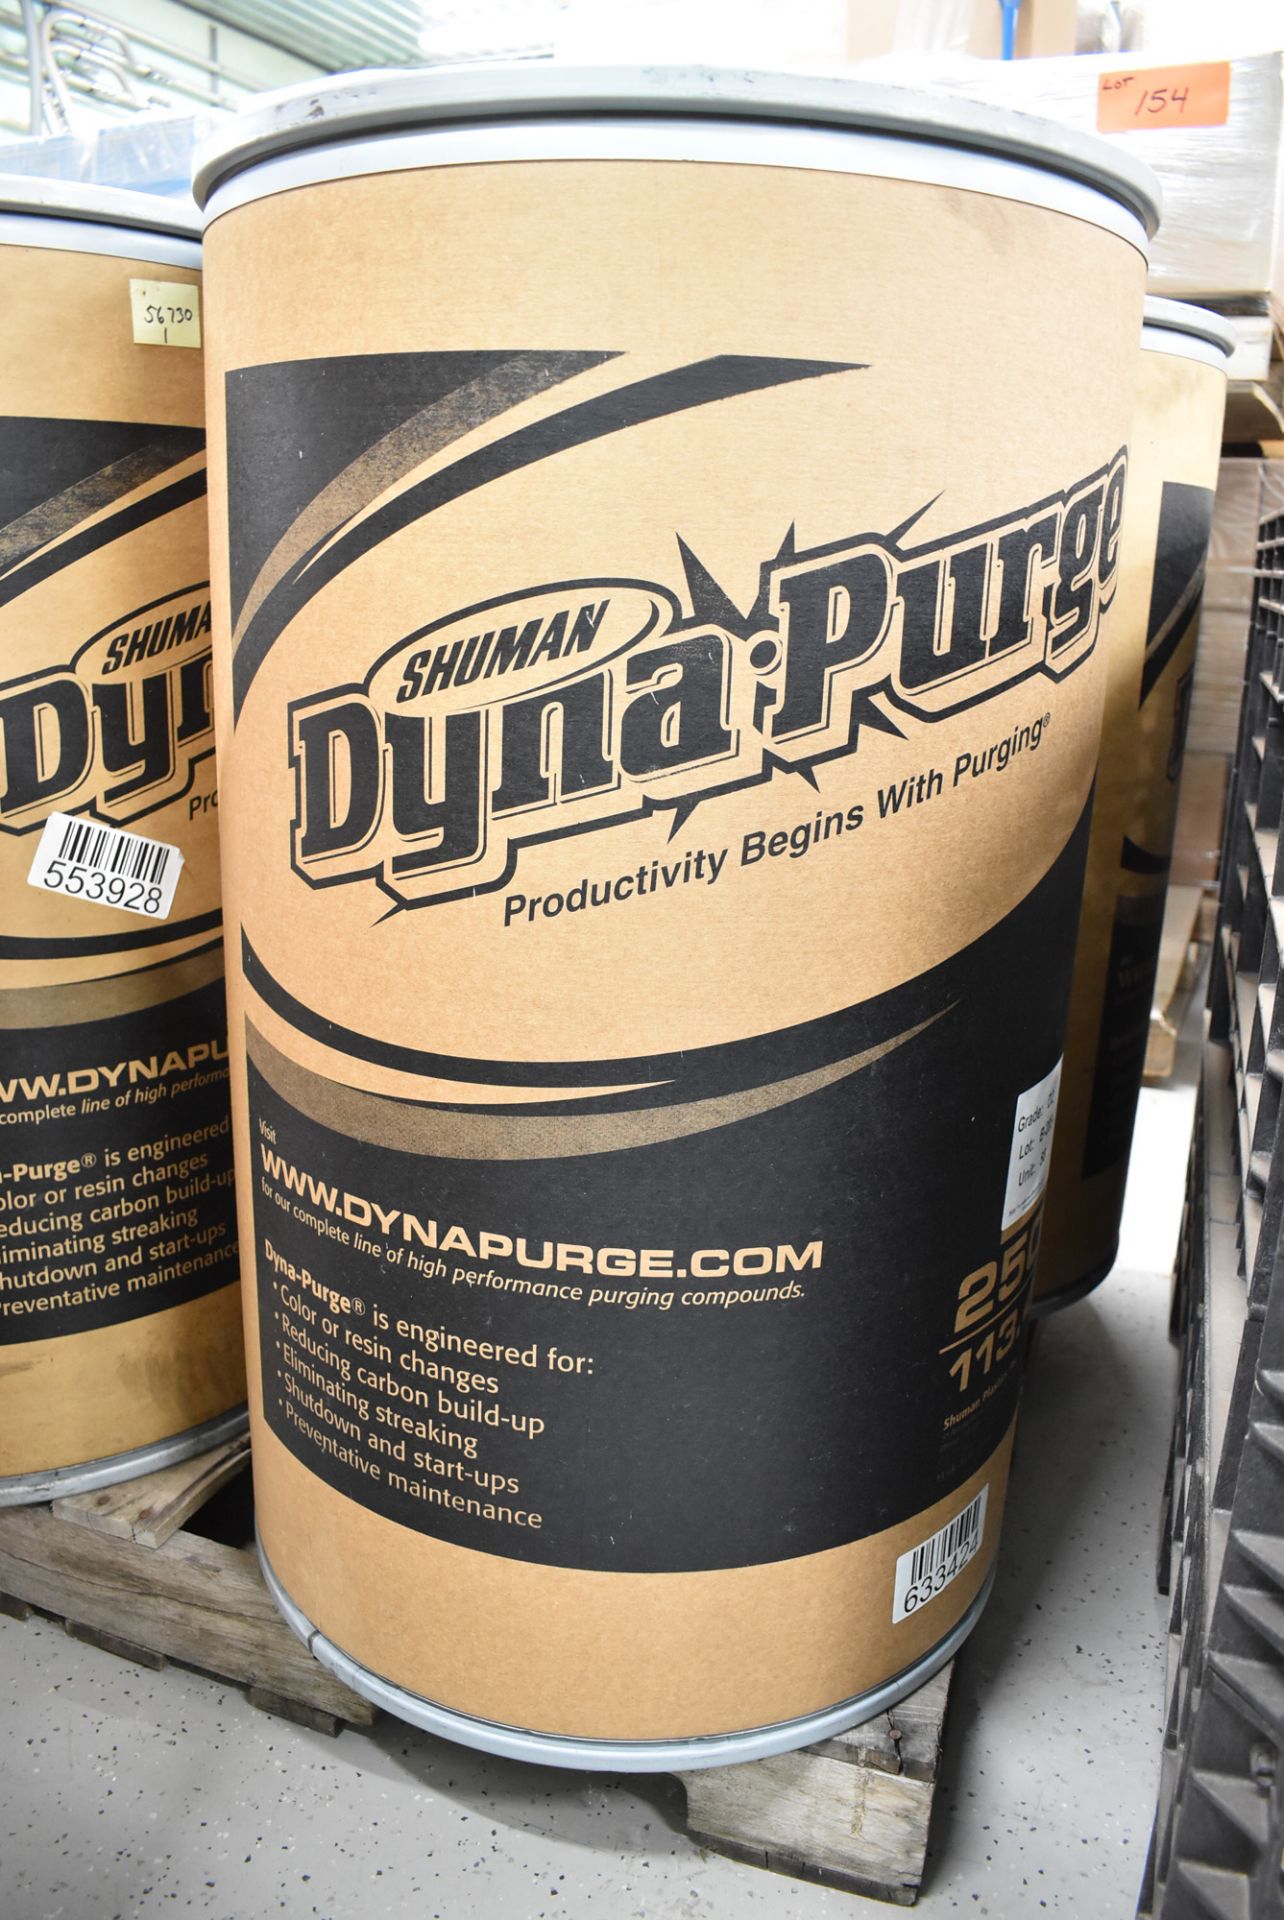 LOT/ (4) DRUMS OF SHUMAN DYNA-PURGE PURGING COMPOUND (APPROX. 1,000 LBS.) - Image 2 of 3